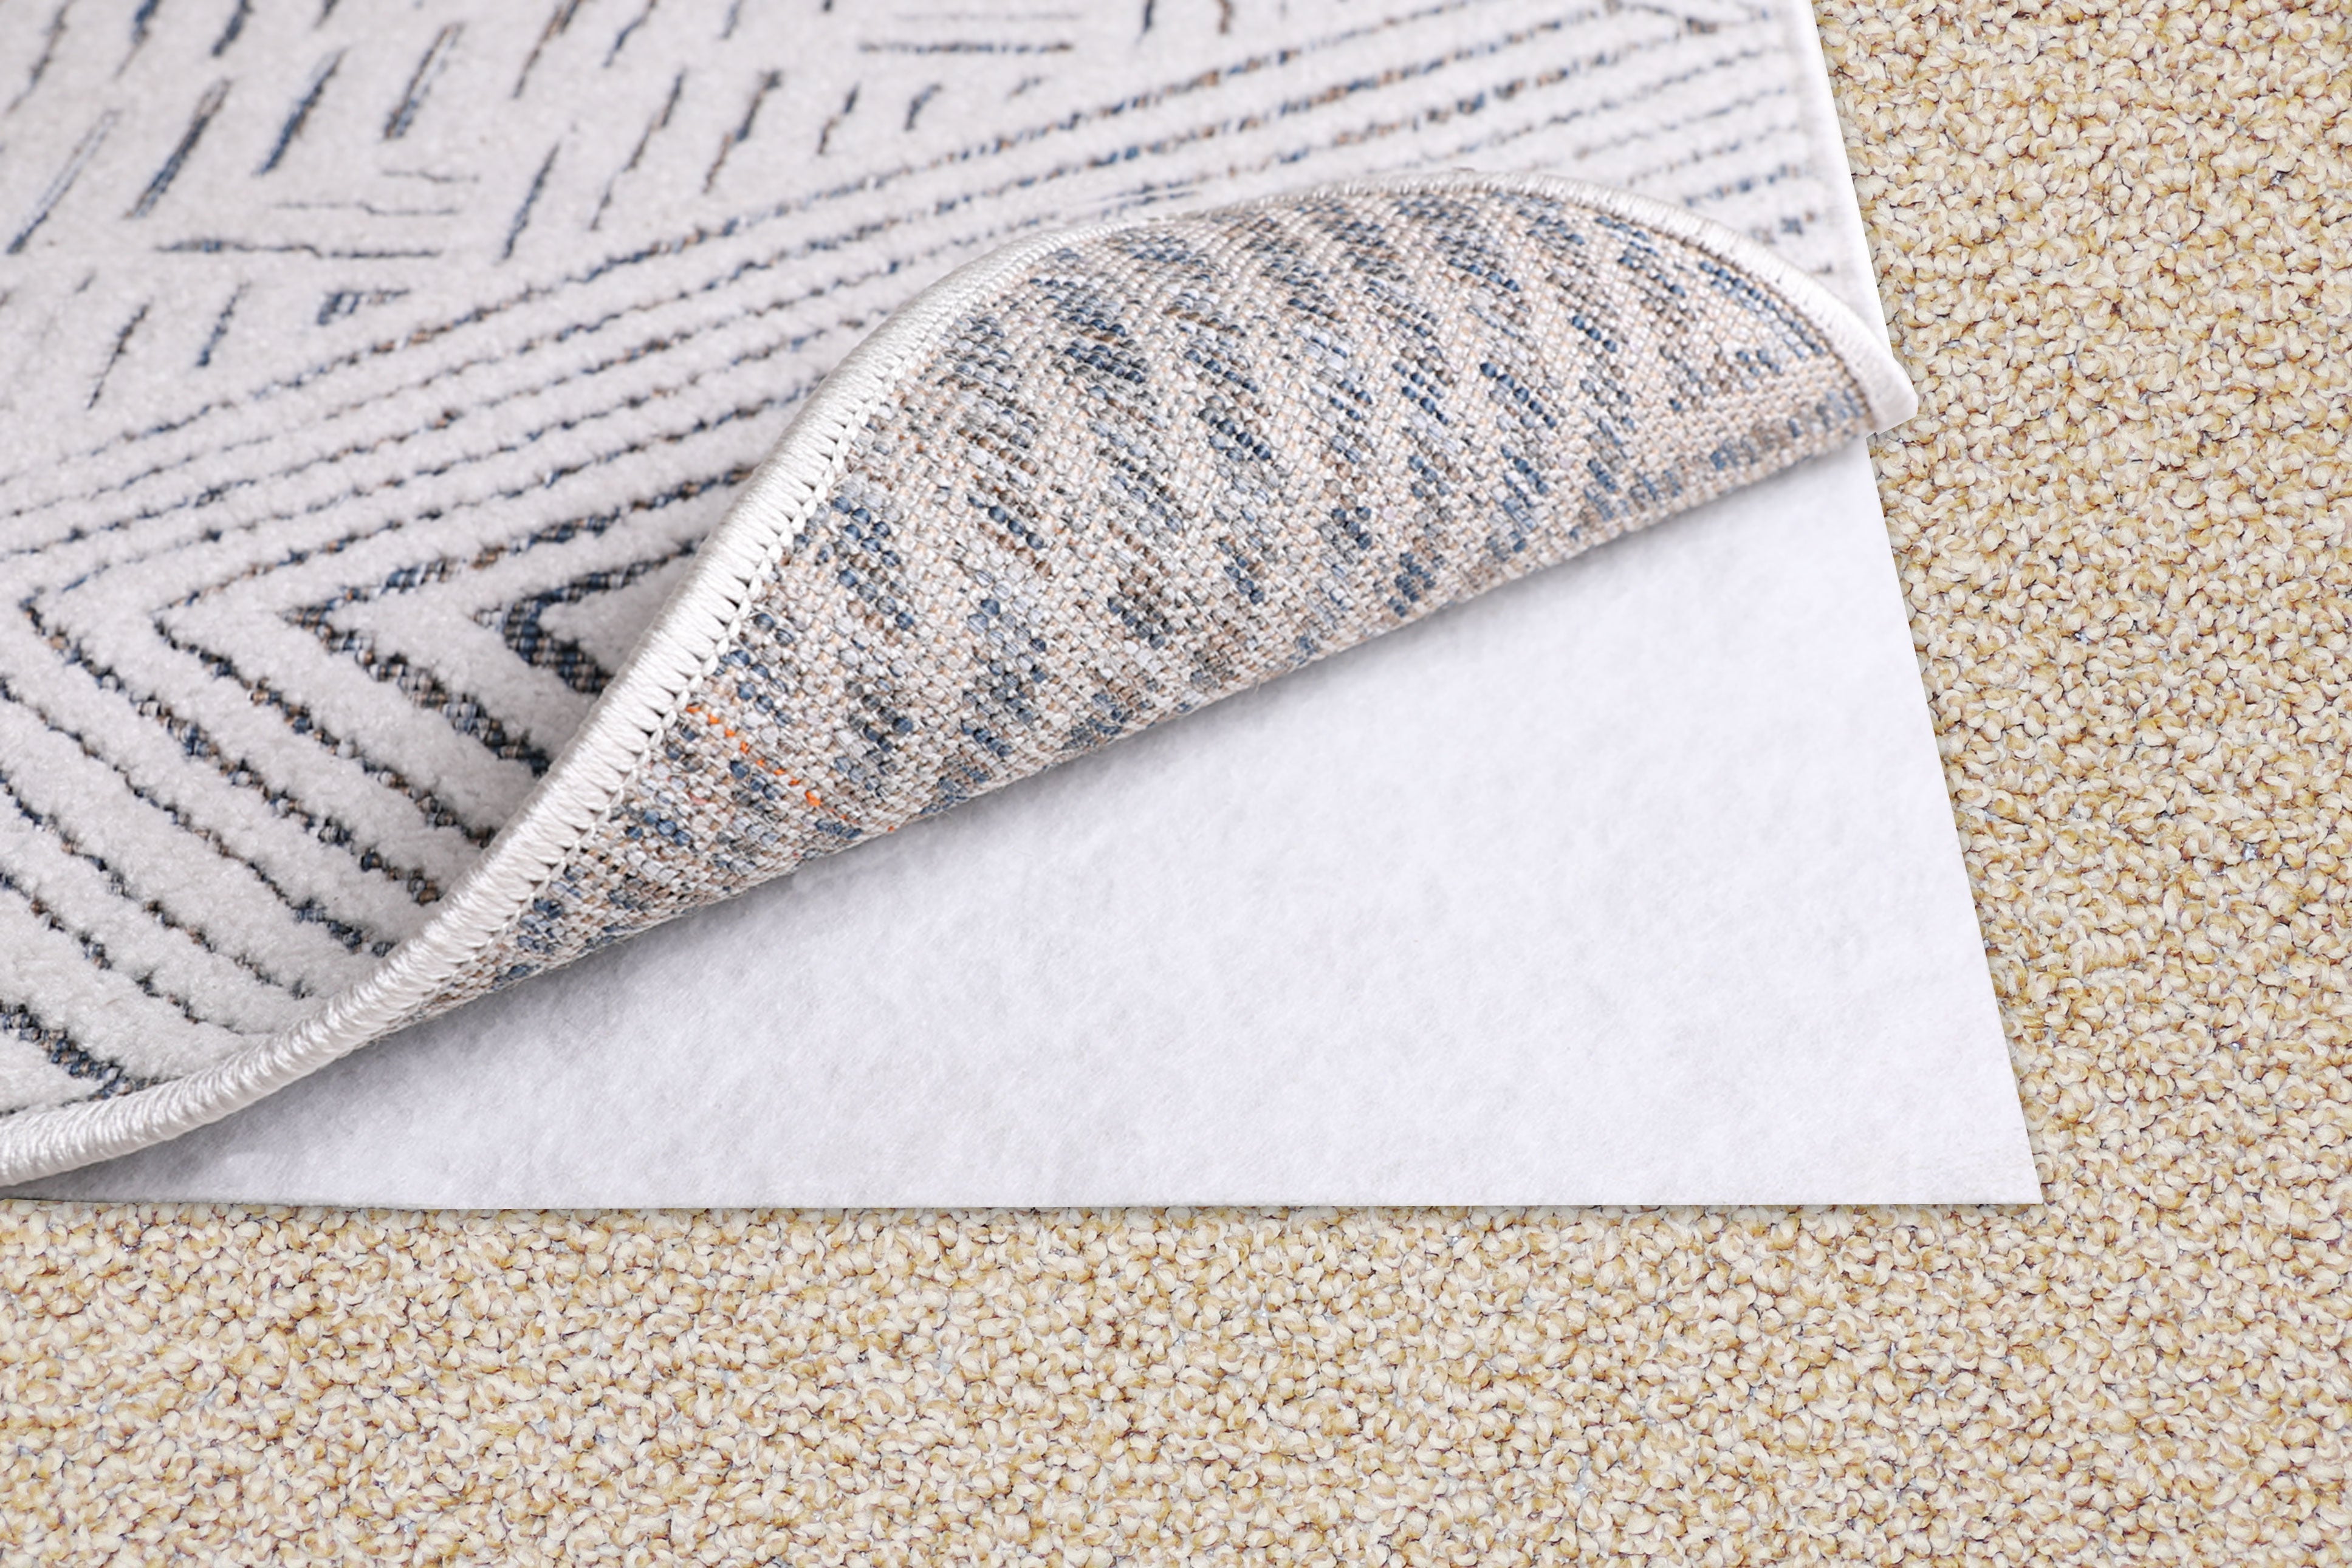 Anti Slip Carpet Pads Make The Corners of Carpet Flat, The Carpet Stickers  are Suitable for